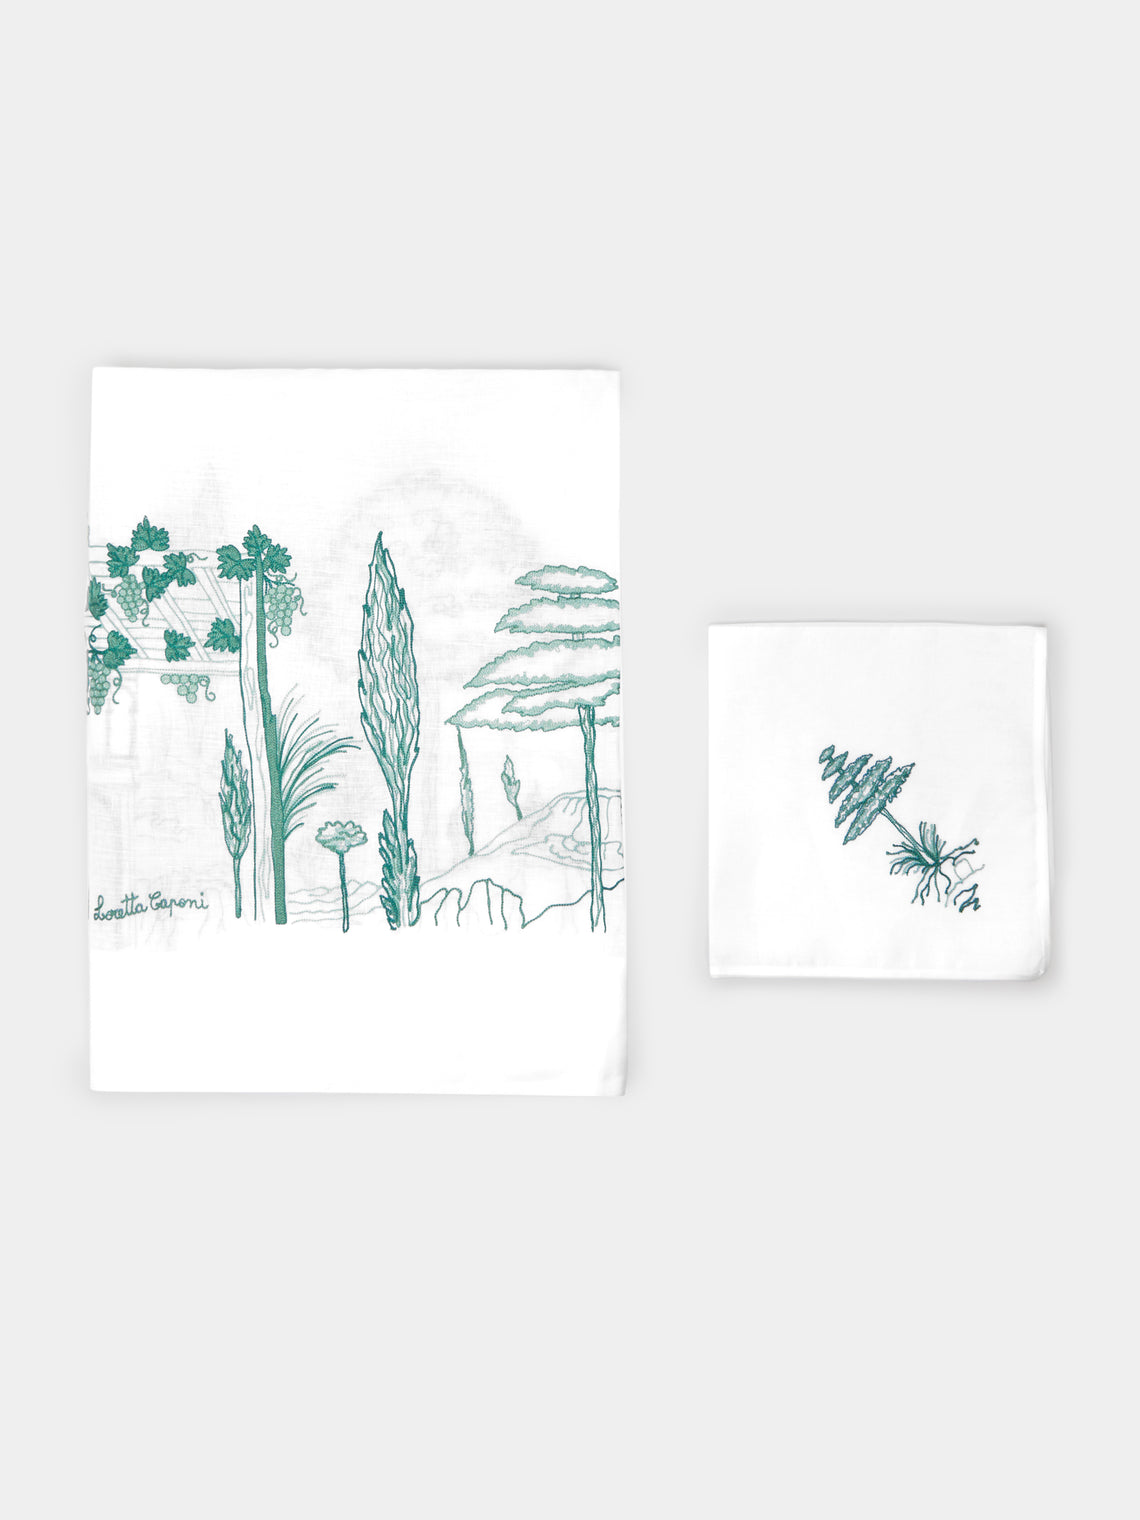 Loretta Caponi - Tuscany Hand-Embroiderd Linen Tablecloth and Napkins (Set of 12) - White - ABASK - 